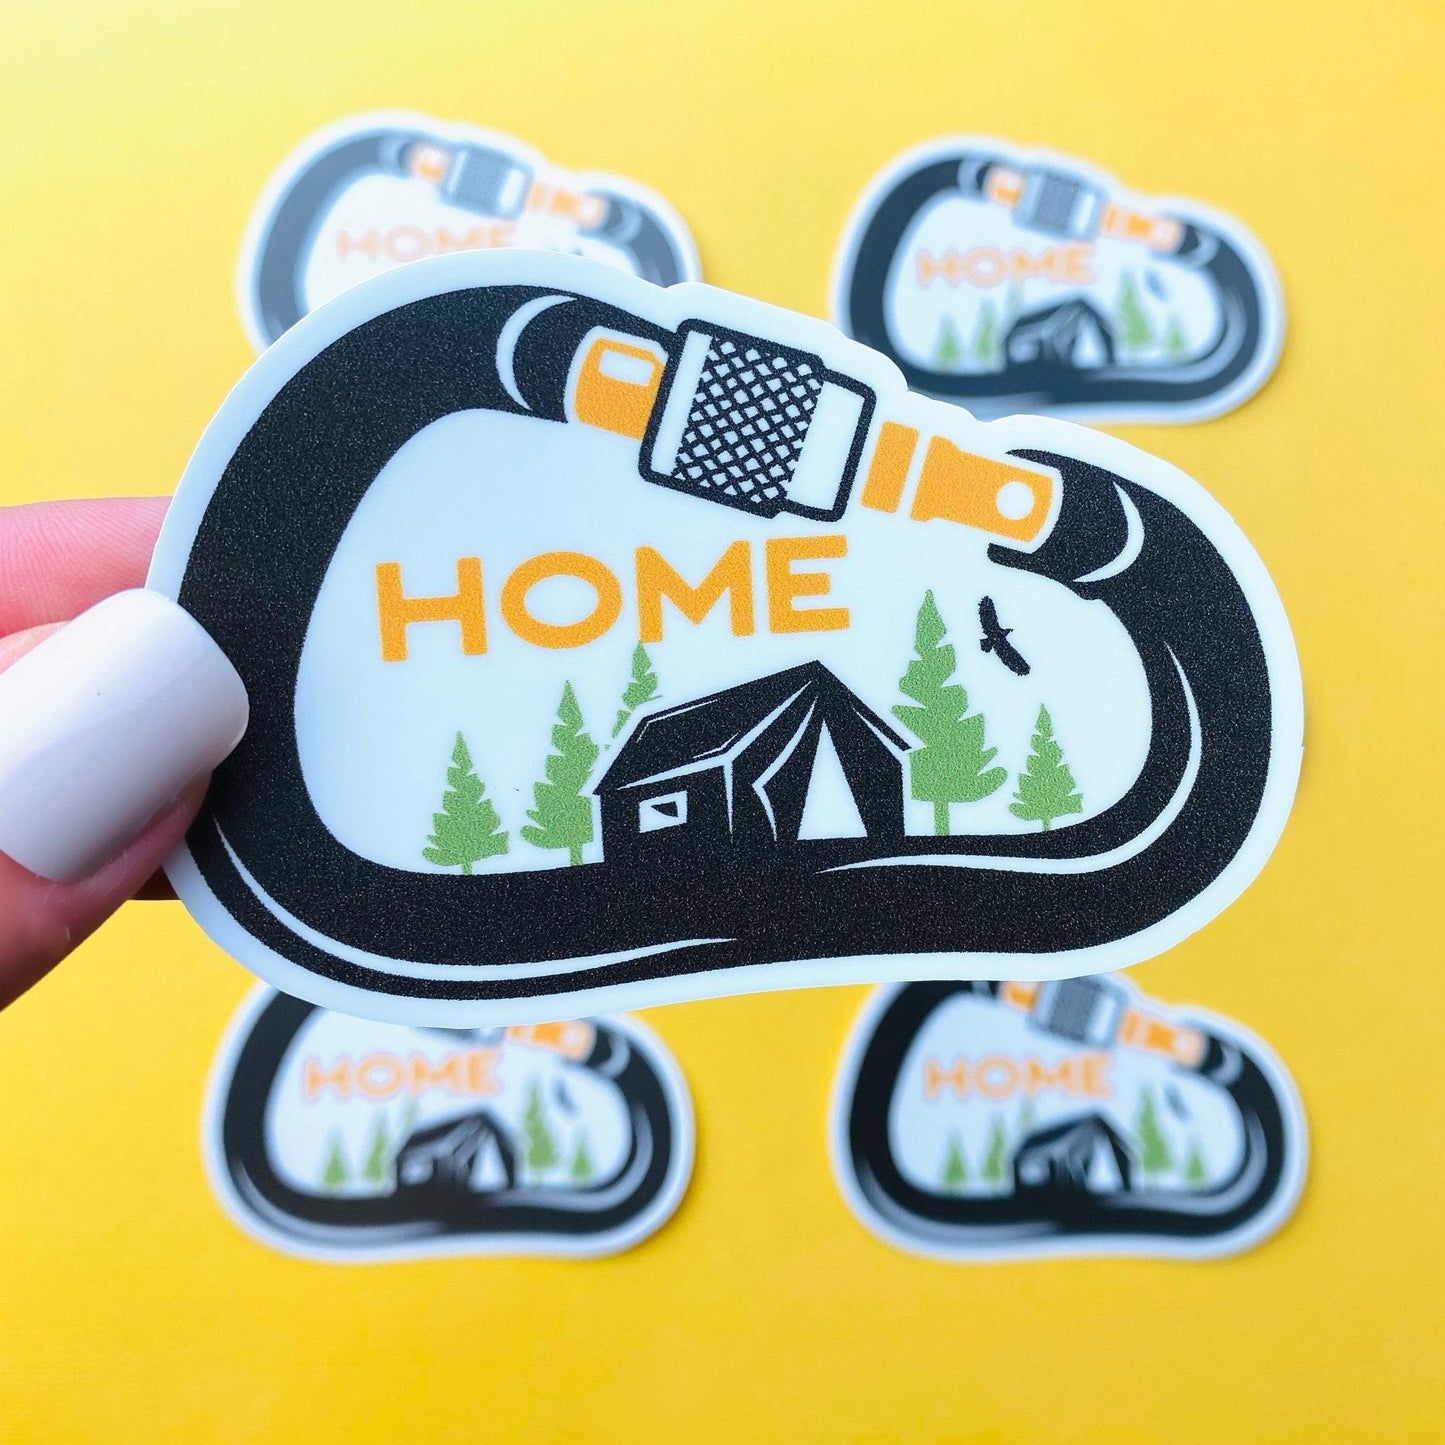 Outdoor Living Sticker Forest Sticker Hiking Sticker Carabiner Sticker for Hikers - Climbers - Ottos Grotto :: Stickers For Your Stuff